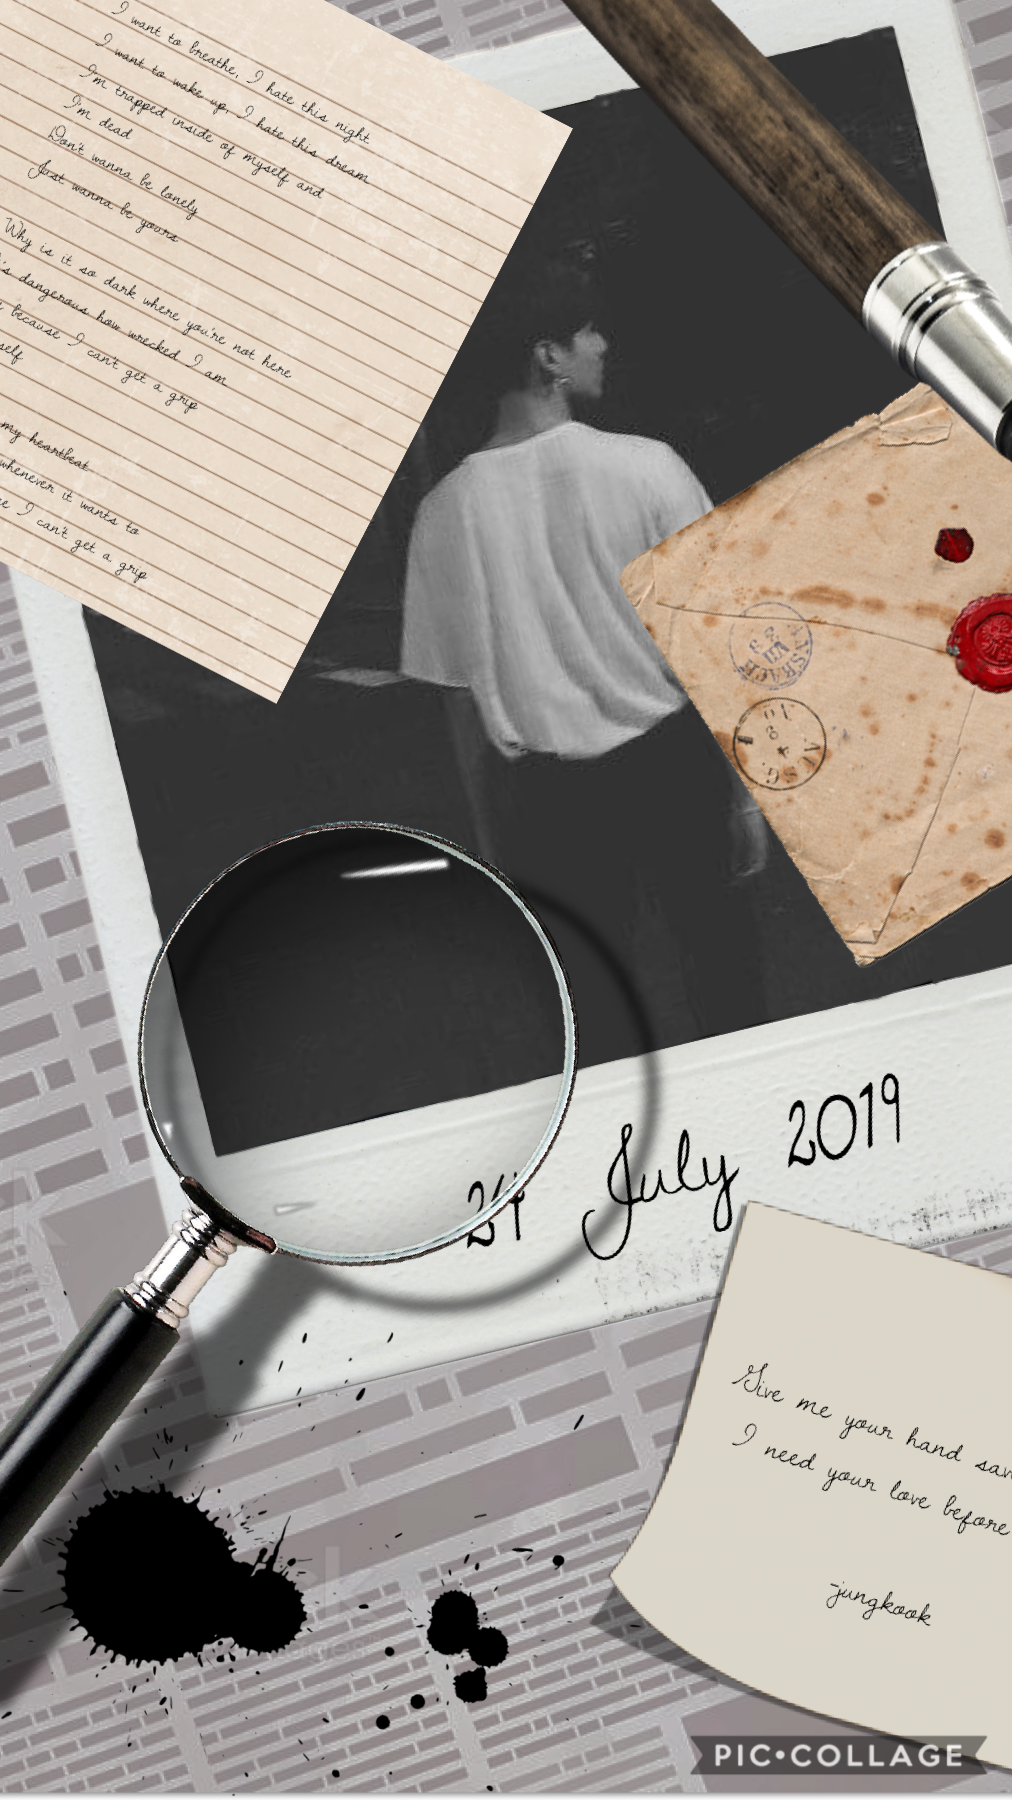 Hey guys Ik y’all don’t remember meh anymore(cuz I wasn’t online much so yea) but I rlly hope you enjoy dis wallpaper edit n btw the date ‘24 July 2019’ has nothing 2 do ft anything BTS has done in d past yr. 